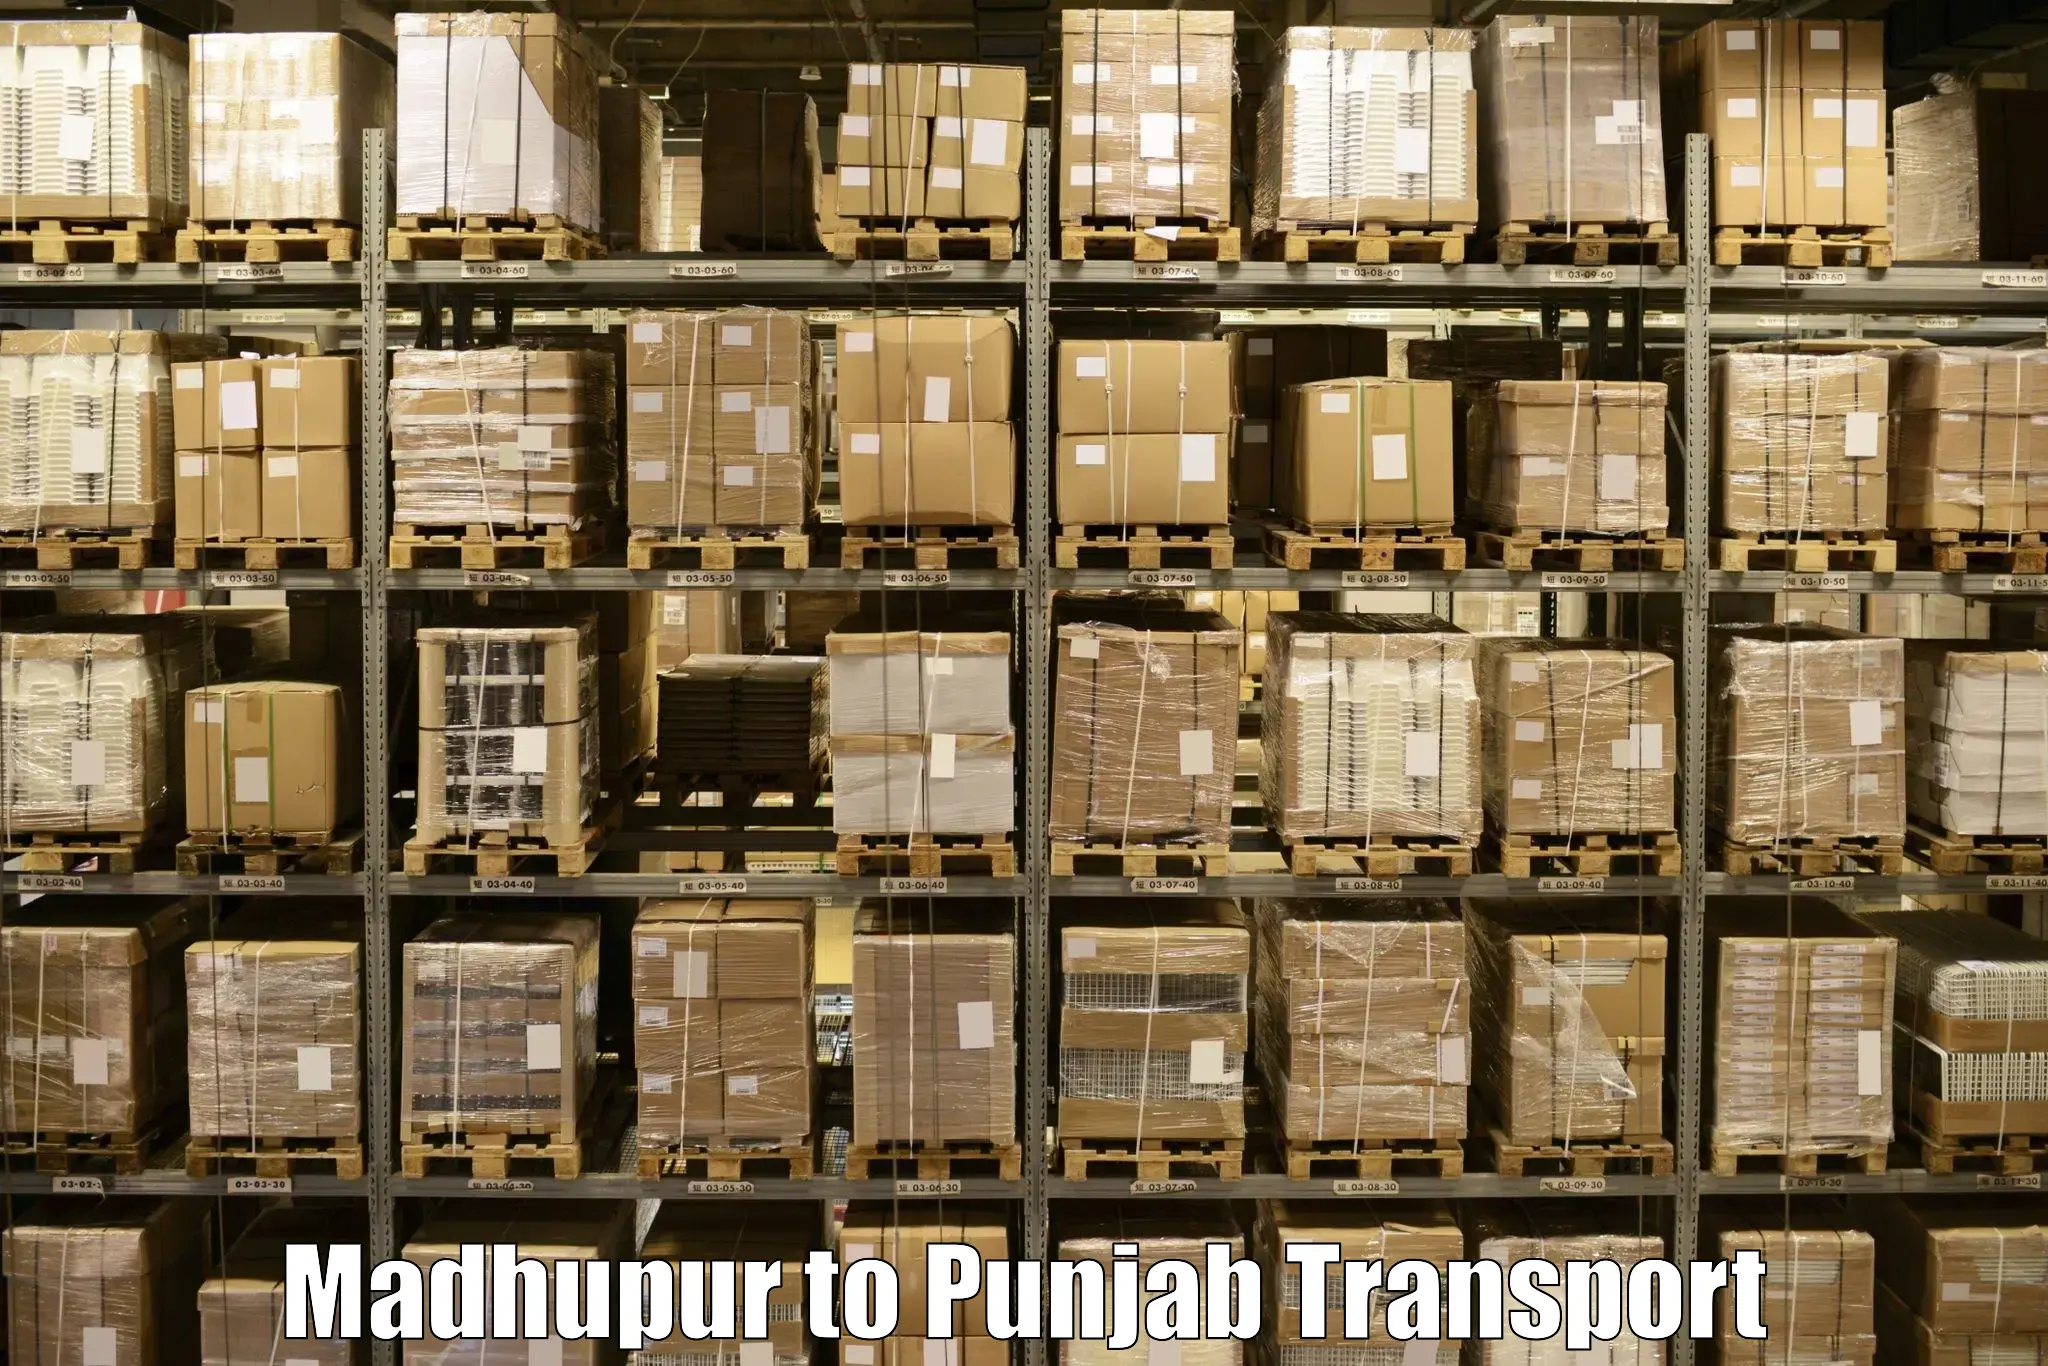 Daily parcel service transport Madhupur to Patiala